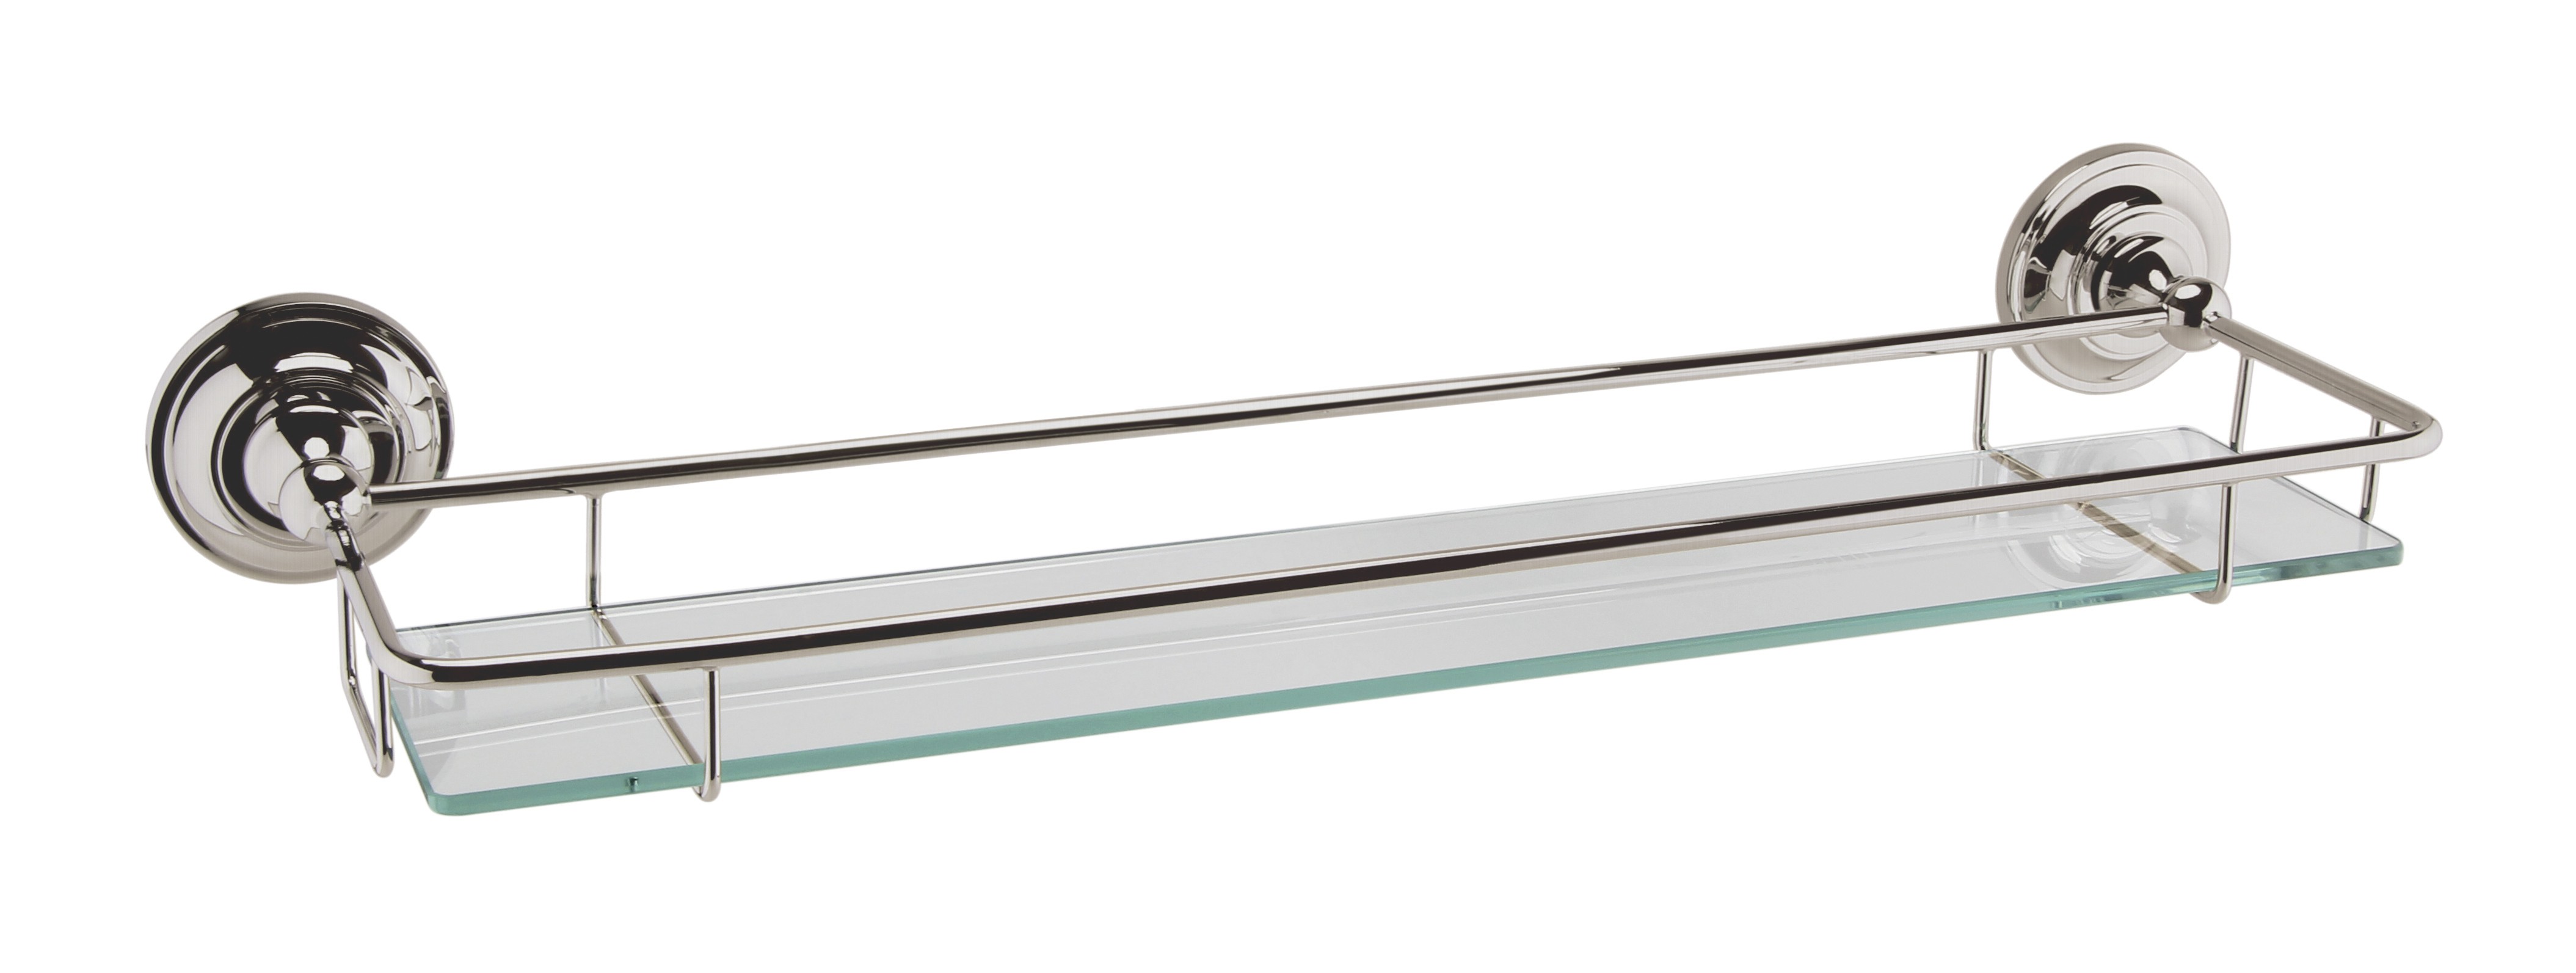 BC Designs Victrion Glass Gallery Shelf 536 x 146mm Brushed Nickel [CMA020BN]